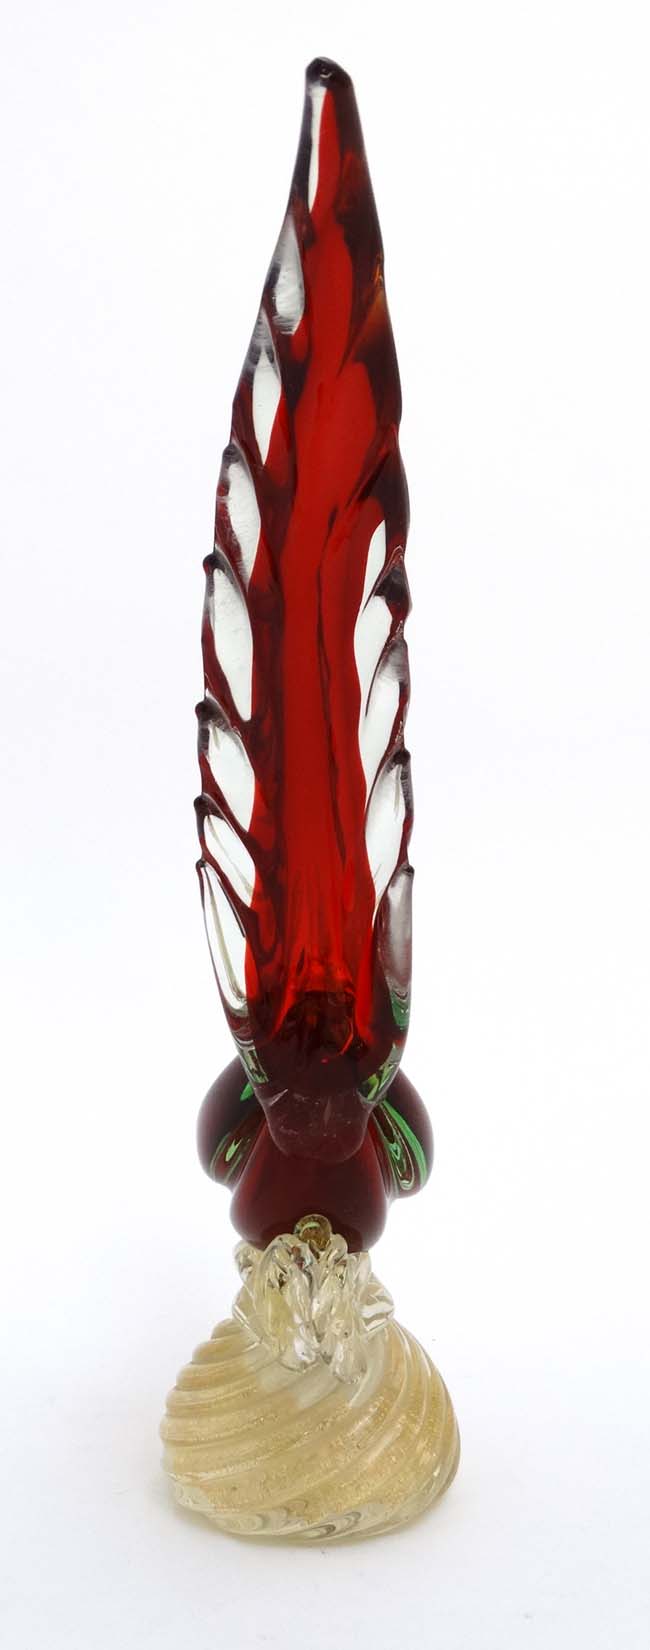 Retro glass : 2 items of Murano style art glass comprising a red clear and gold fleck model of a - Image 8 of 9